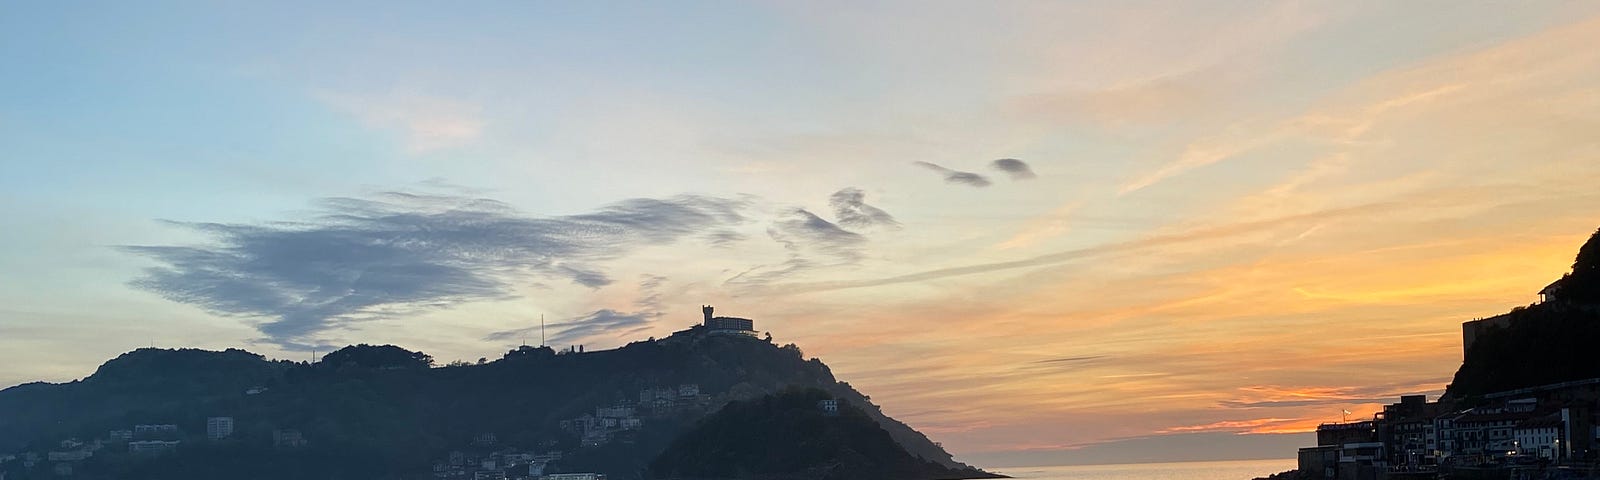 Sunset on San Sebastian as photographed by the author.